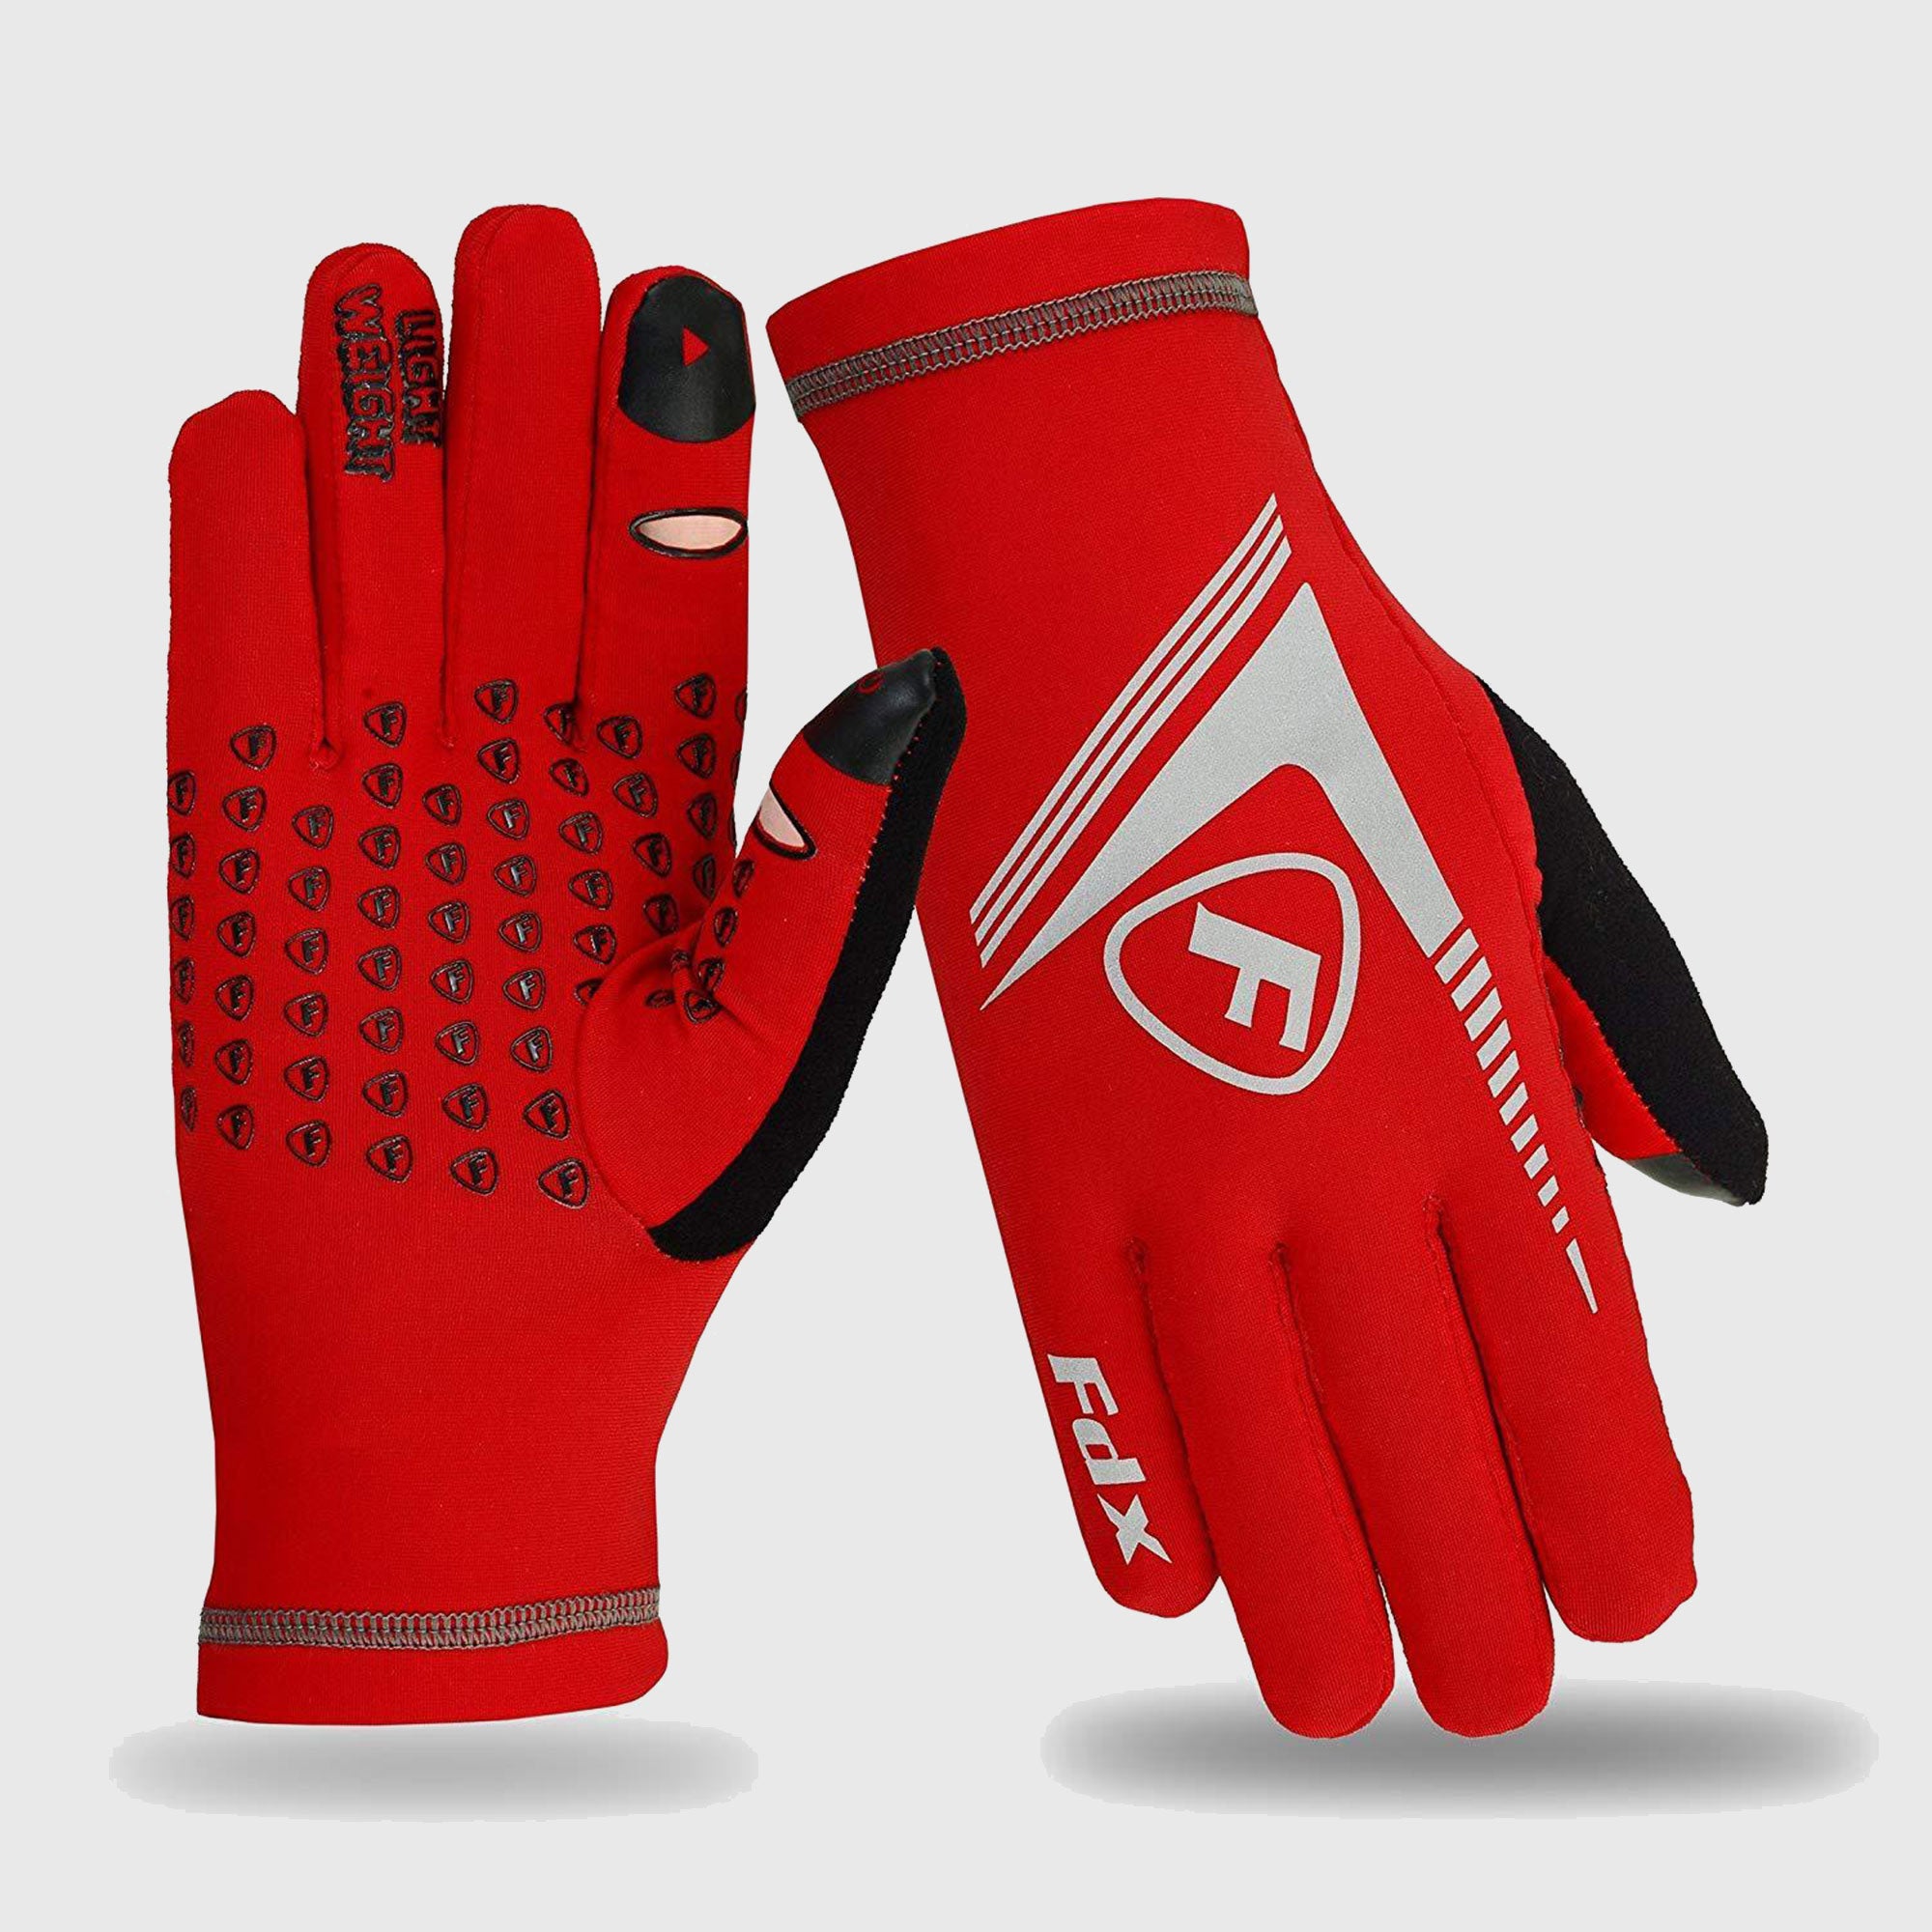 Fdx Red & White Full Finger Cycling Gloves for Winter MTB Road Bike Reflective Thermal & Touch Screen - Frost